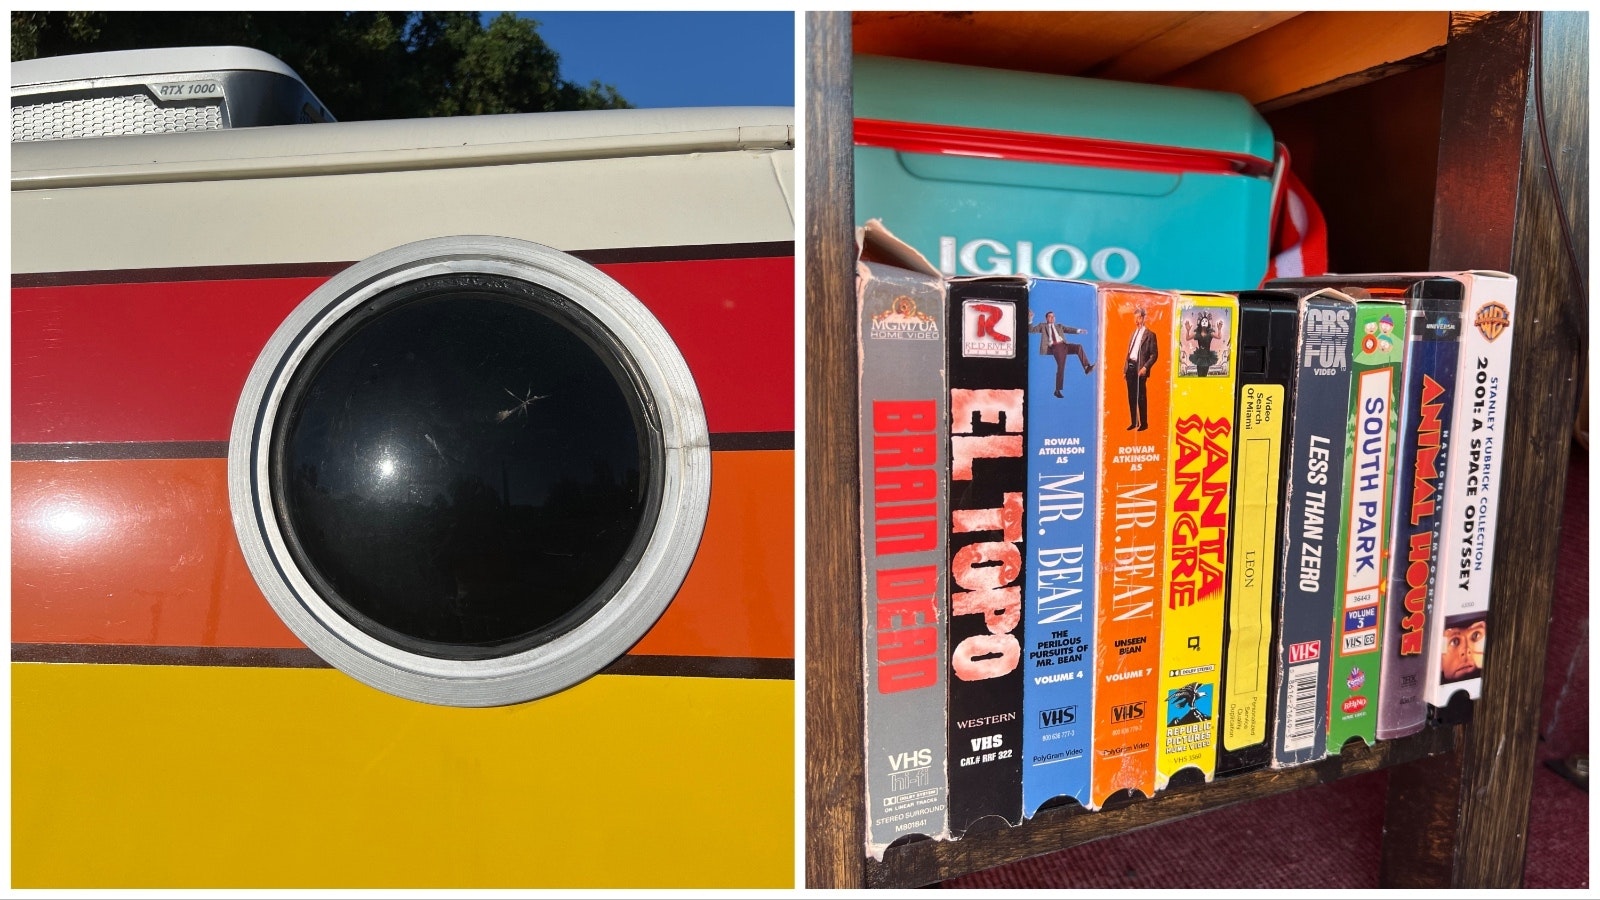 The porthole is a classic 1970s van feature, while the entertainment, while still vintage, is more 1980s with VHS tapes.